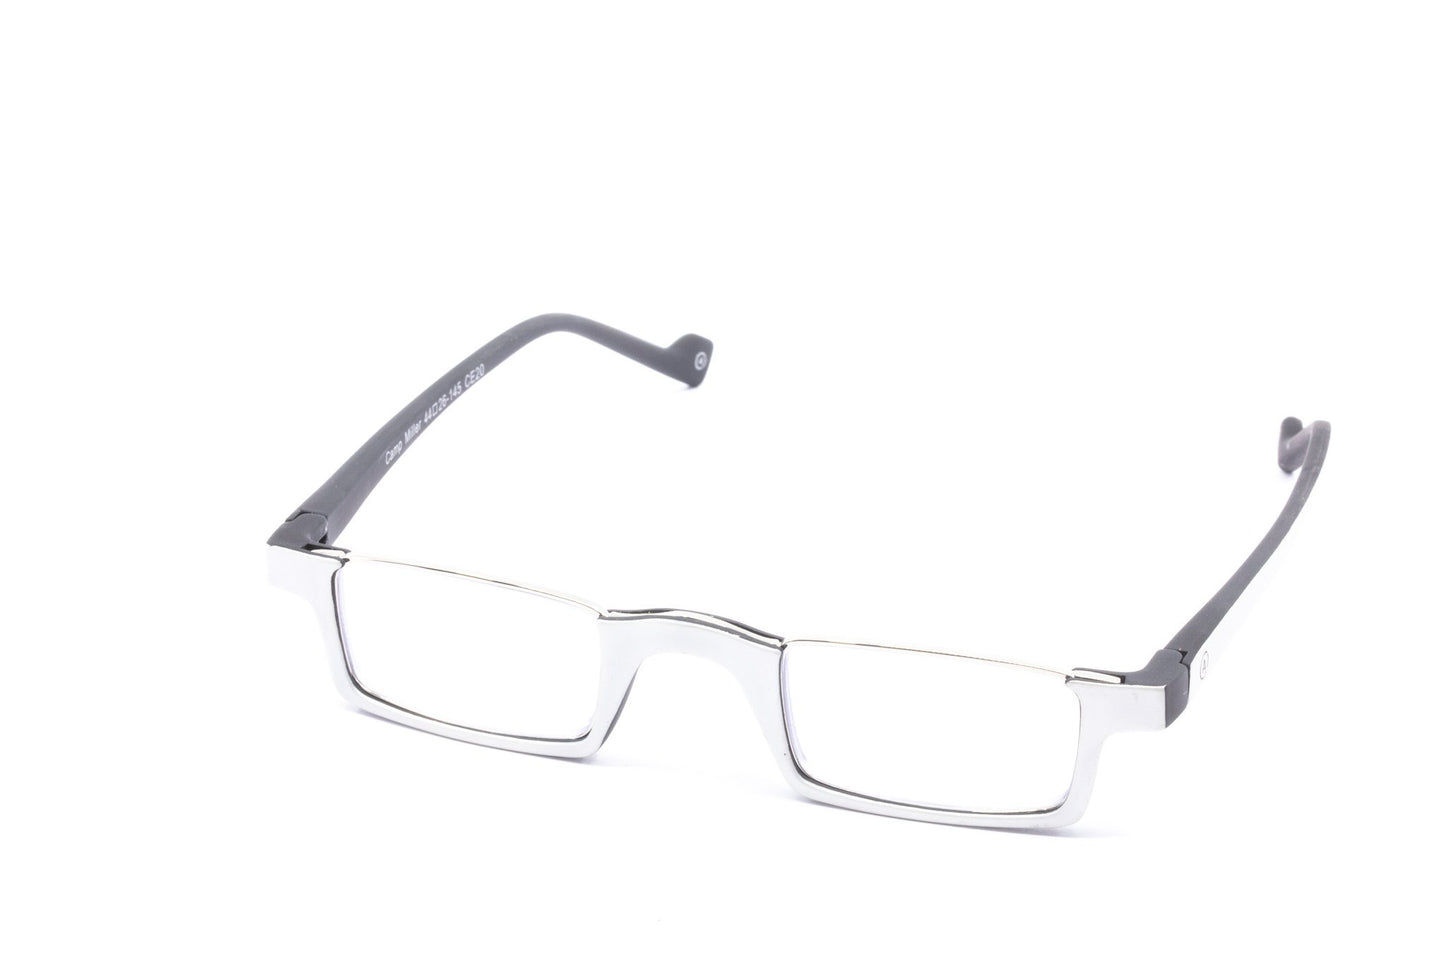 Aptica Camp Miller Ready Reading Glasses Unisex Blue Light Filter Sideview